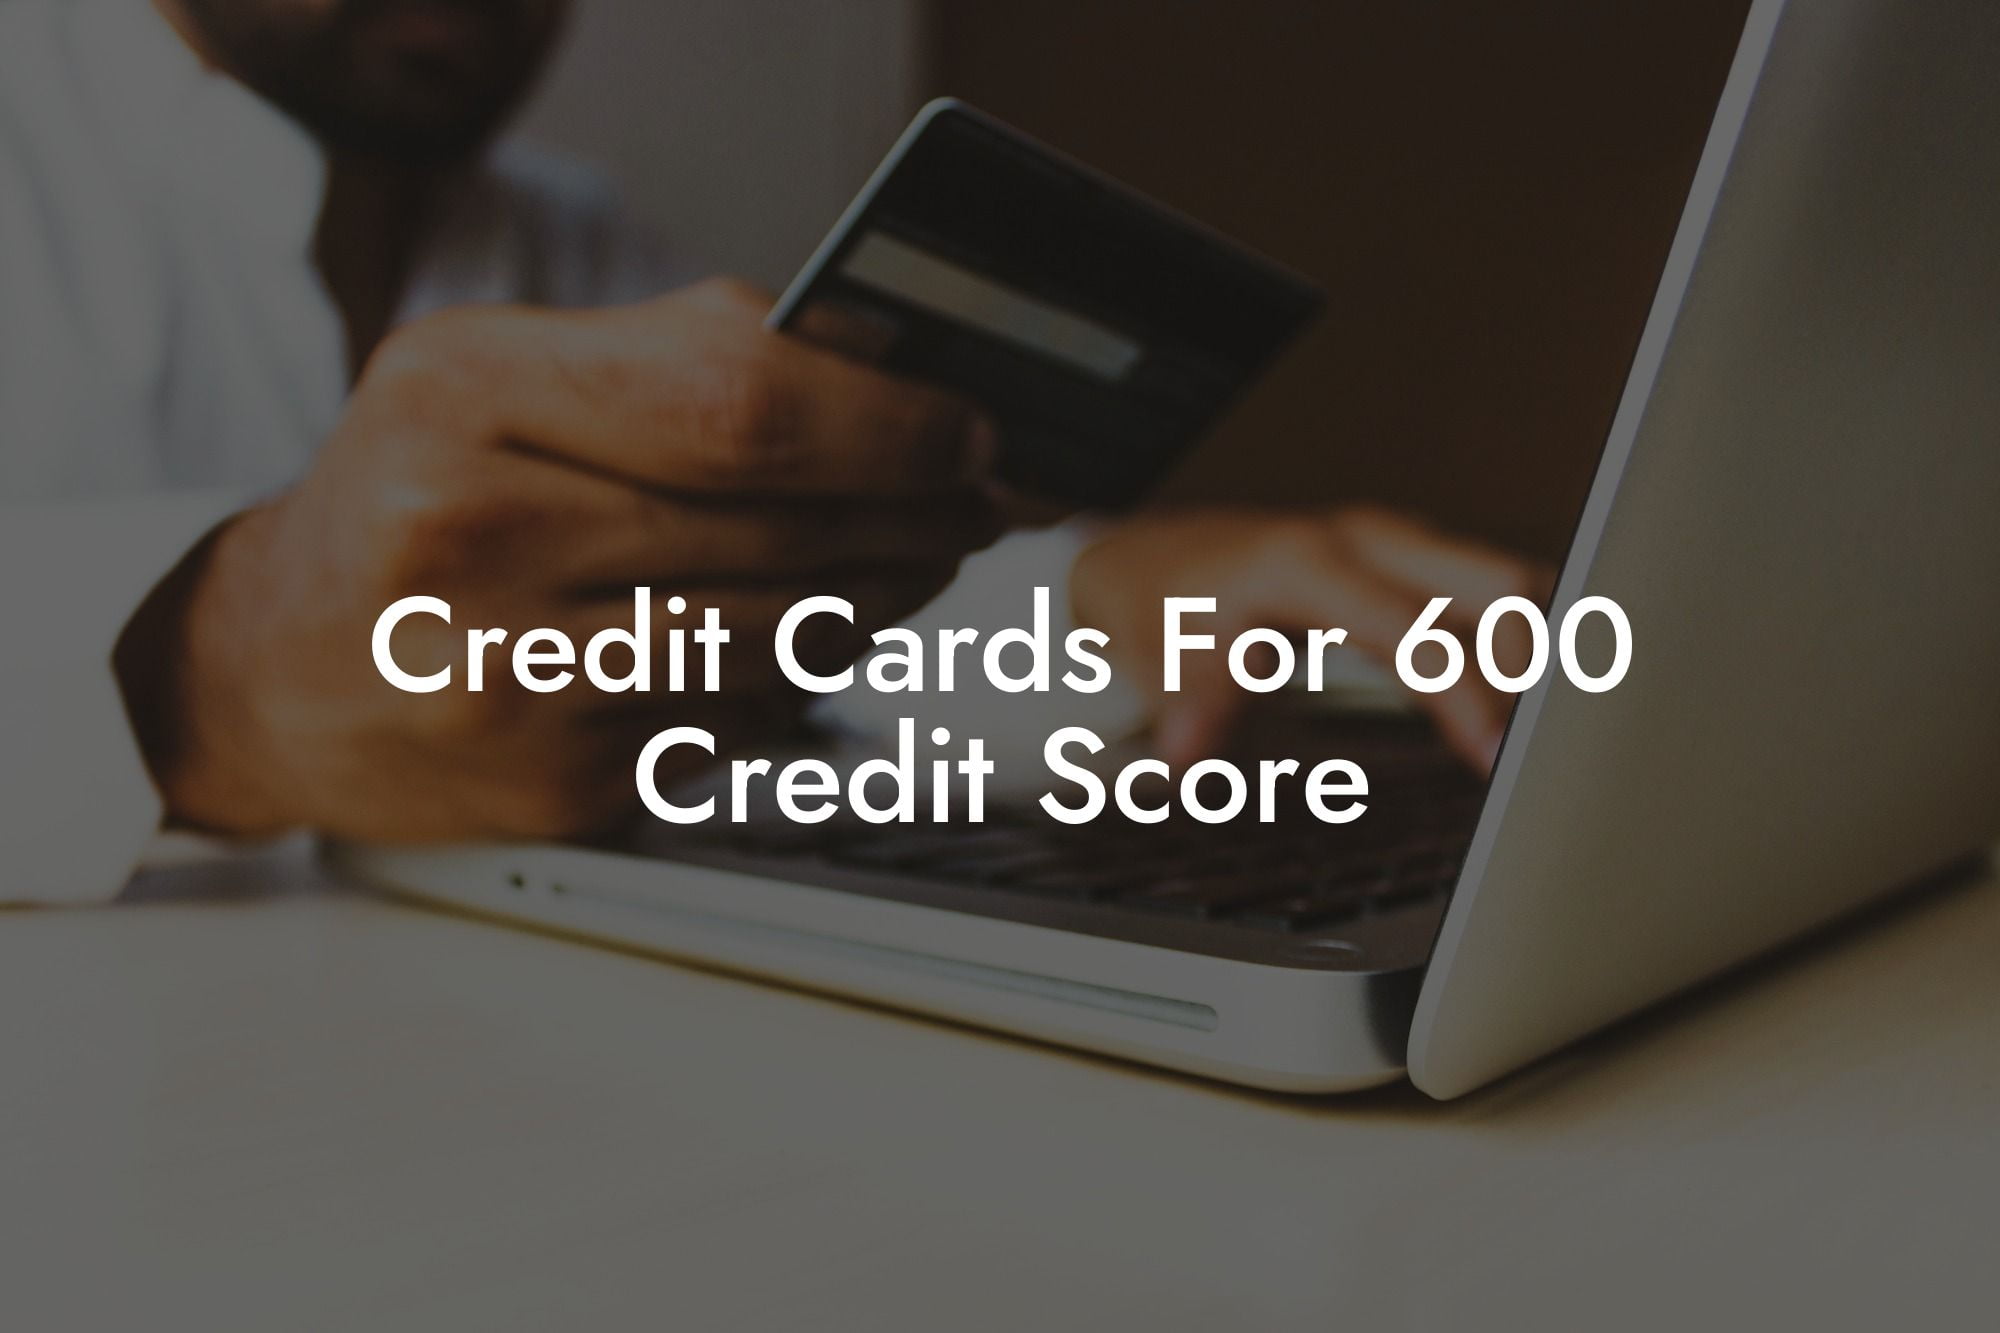 Credit Cards For 600 Credit Score